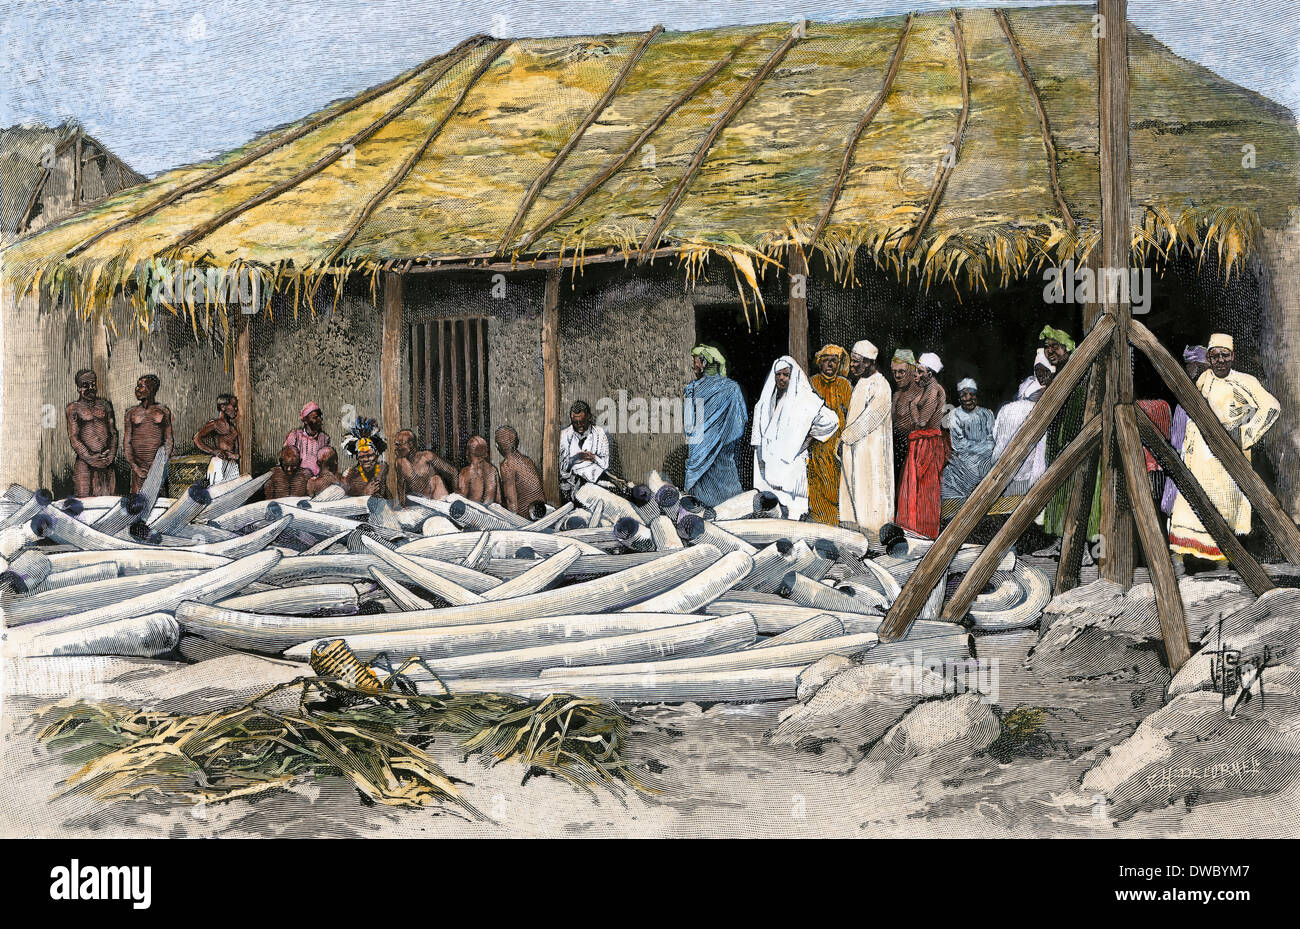 Ivory displayed at Tippu Tib's camp on the Congo, 1880s. Hand-colored woodcut Stock Photo